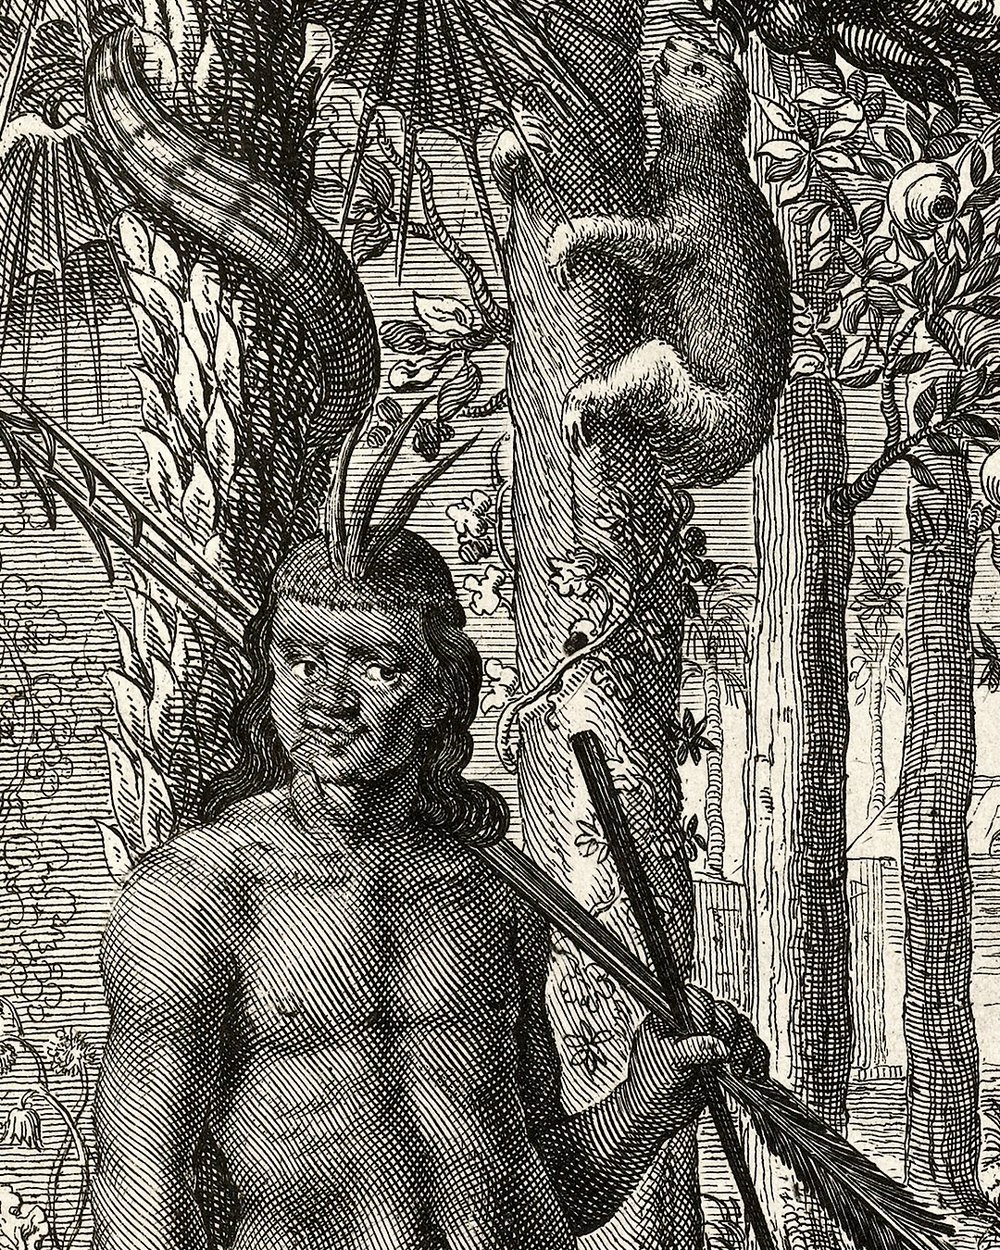 "Brazilians in a forest" (1648)